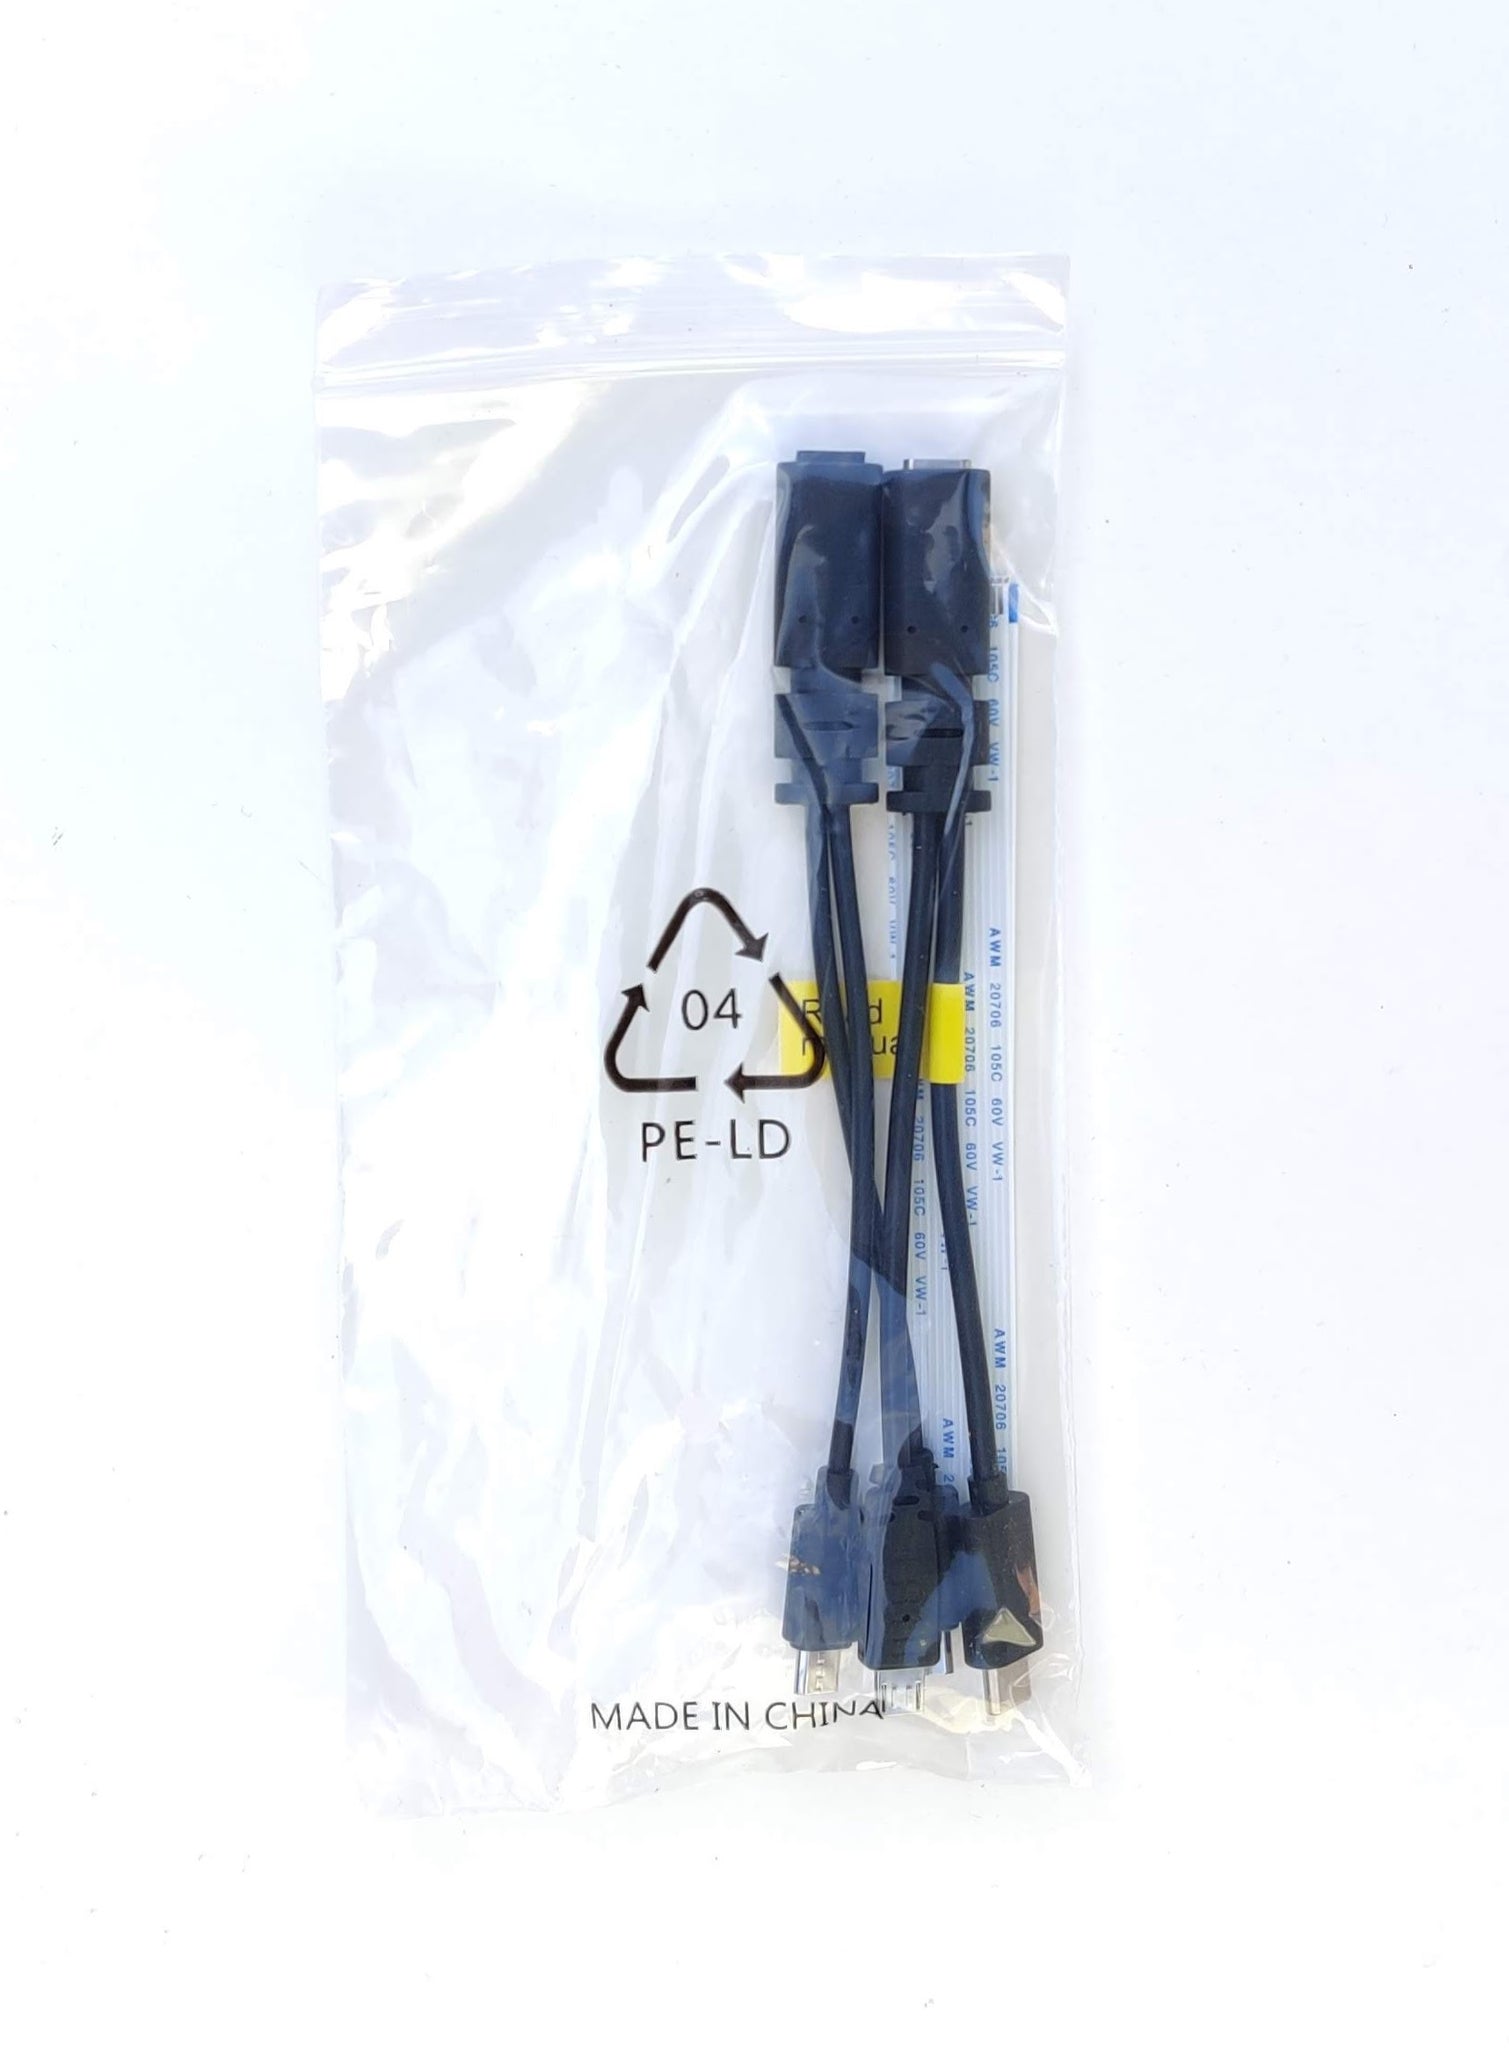 SmartiPi Touch Pro cable replacement set